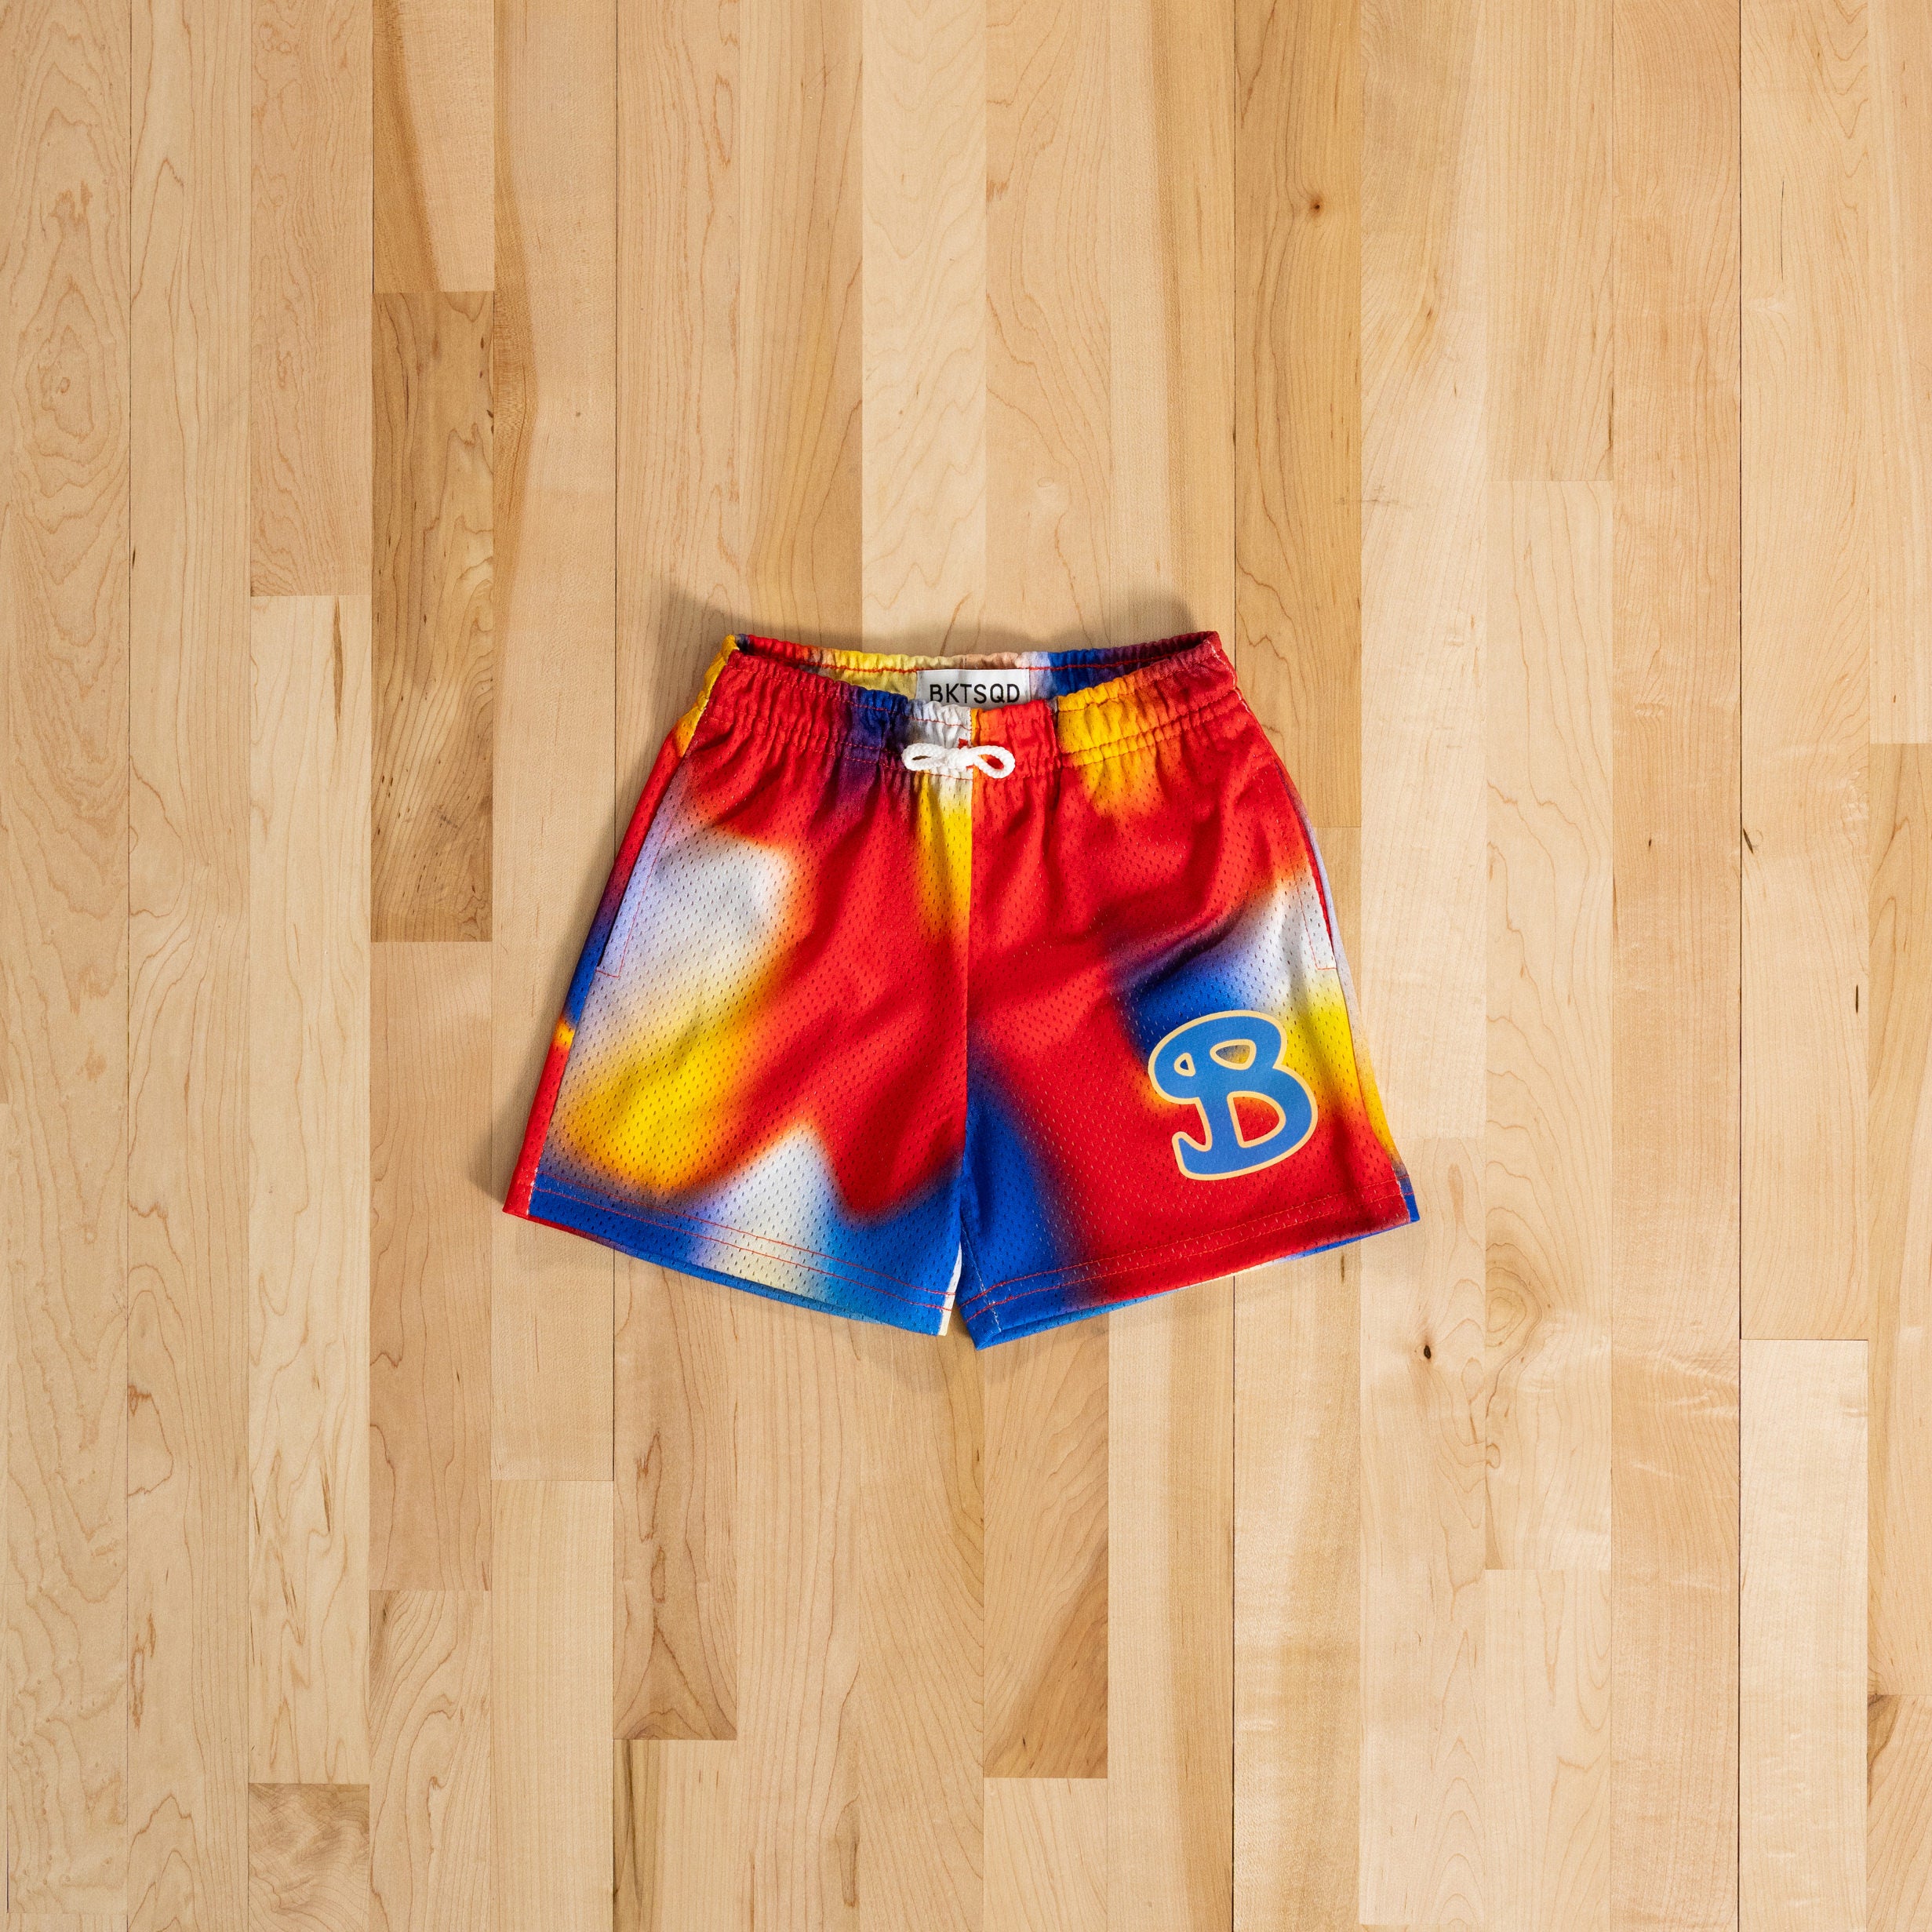 MARCH SLAM YOUTH SHORTS - BLUE, RED, YELLOW